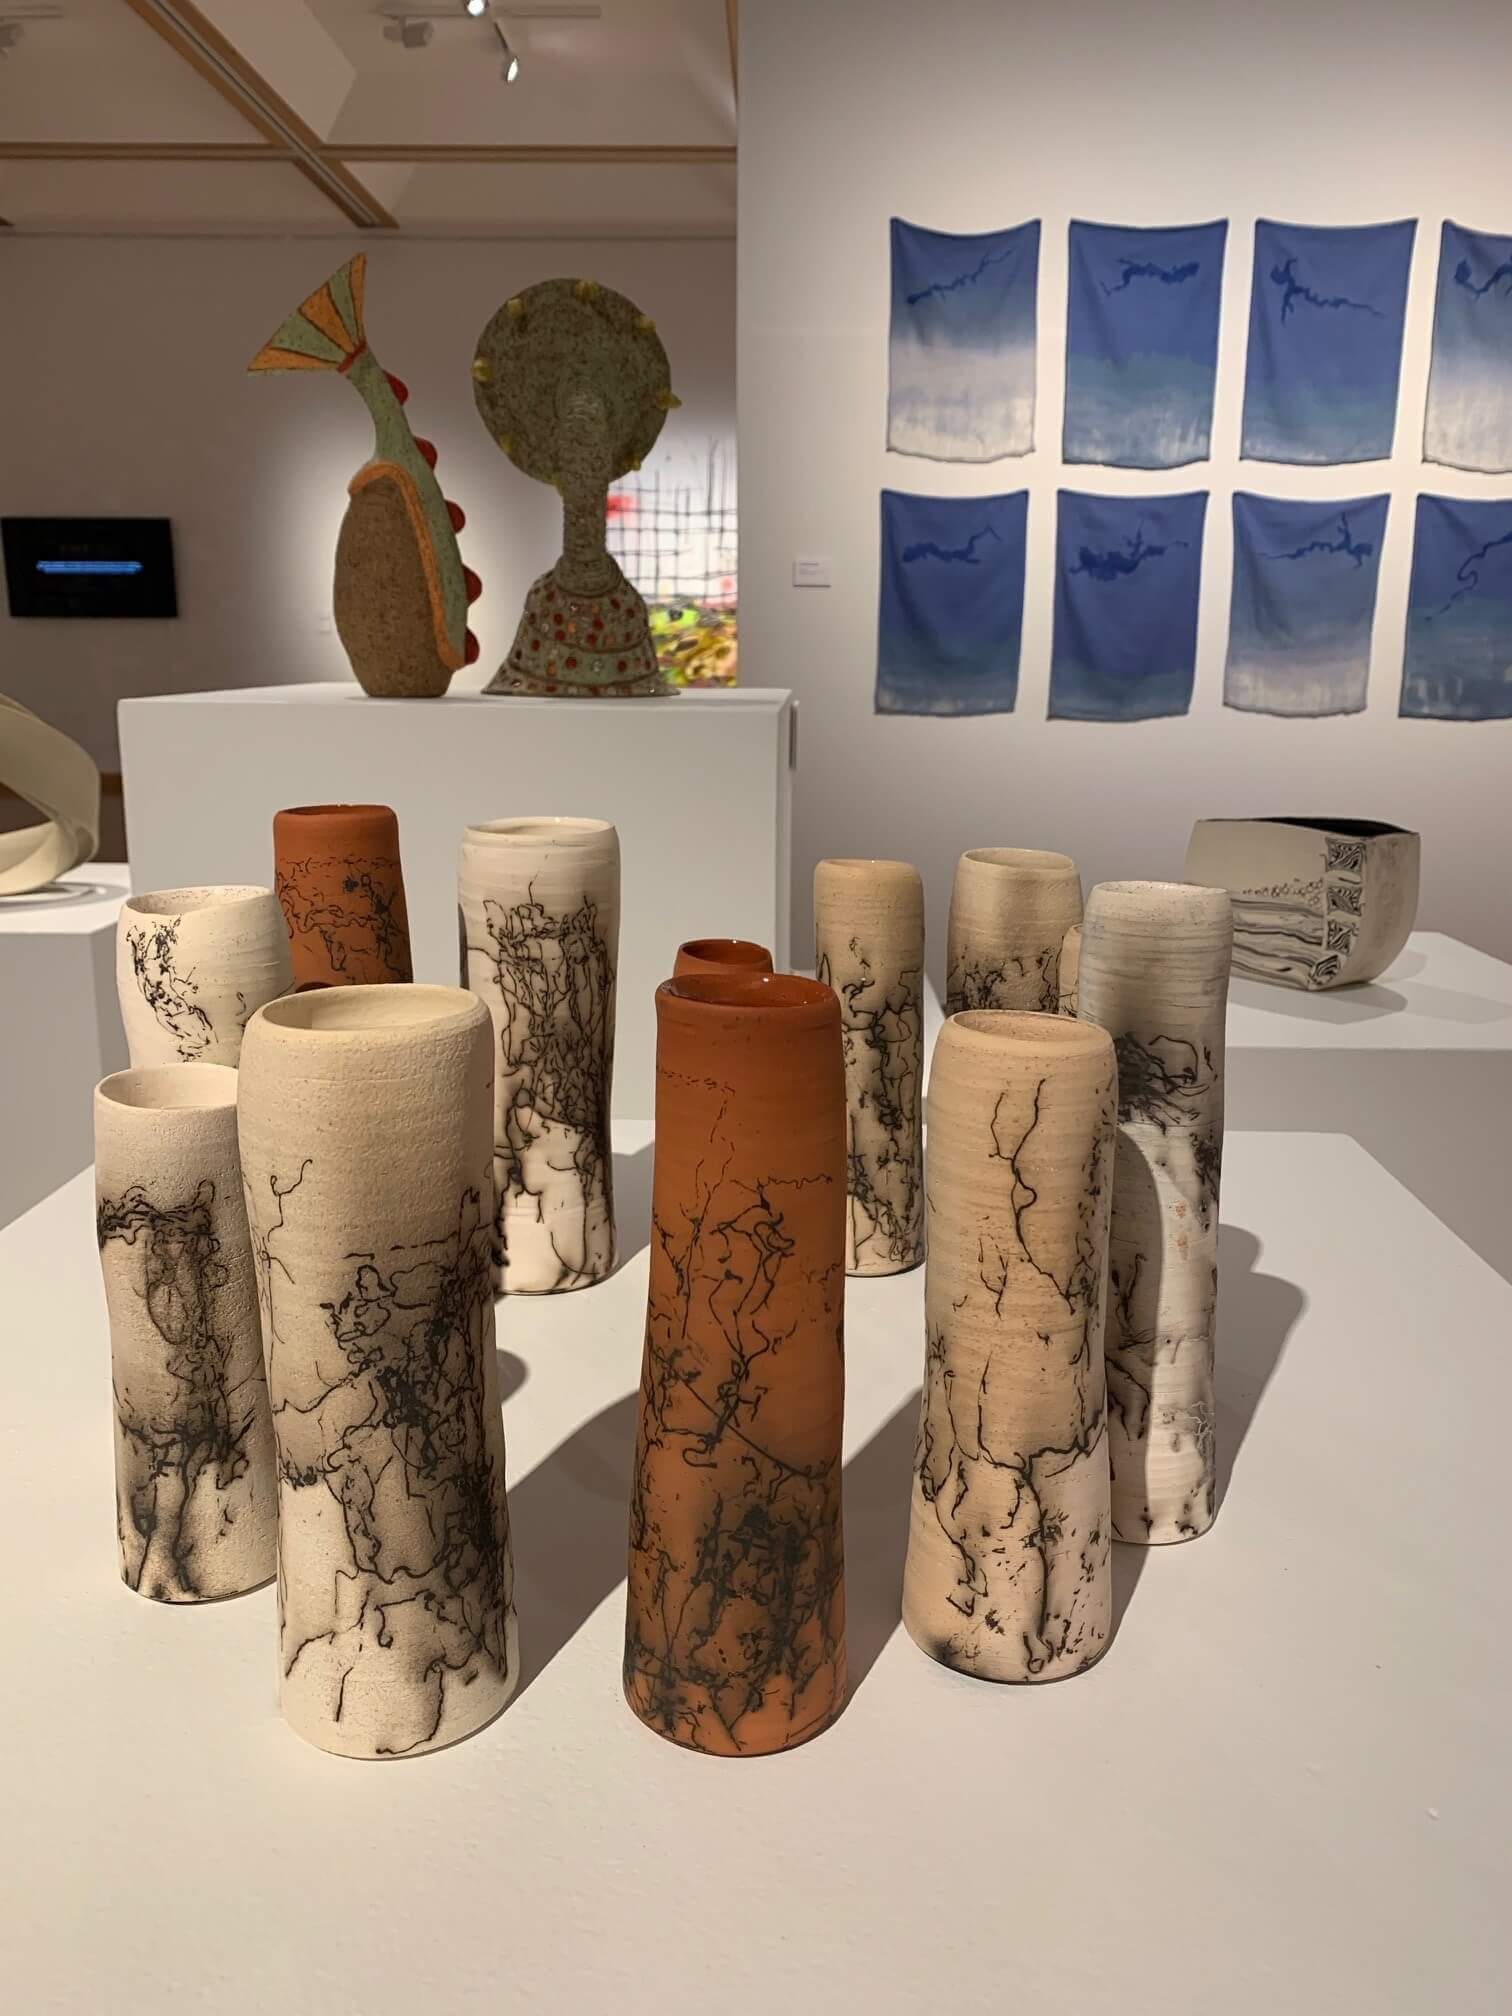 gosford gallery space with ceramics